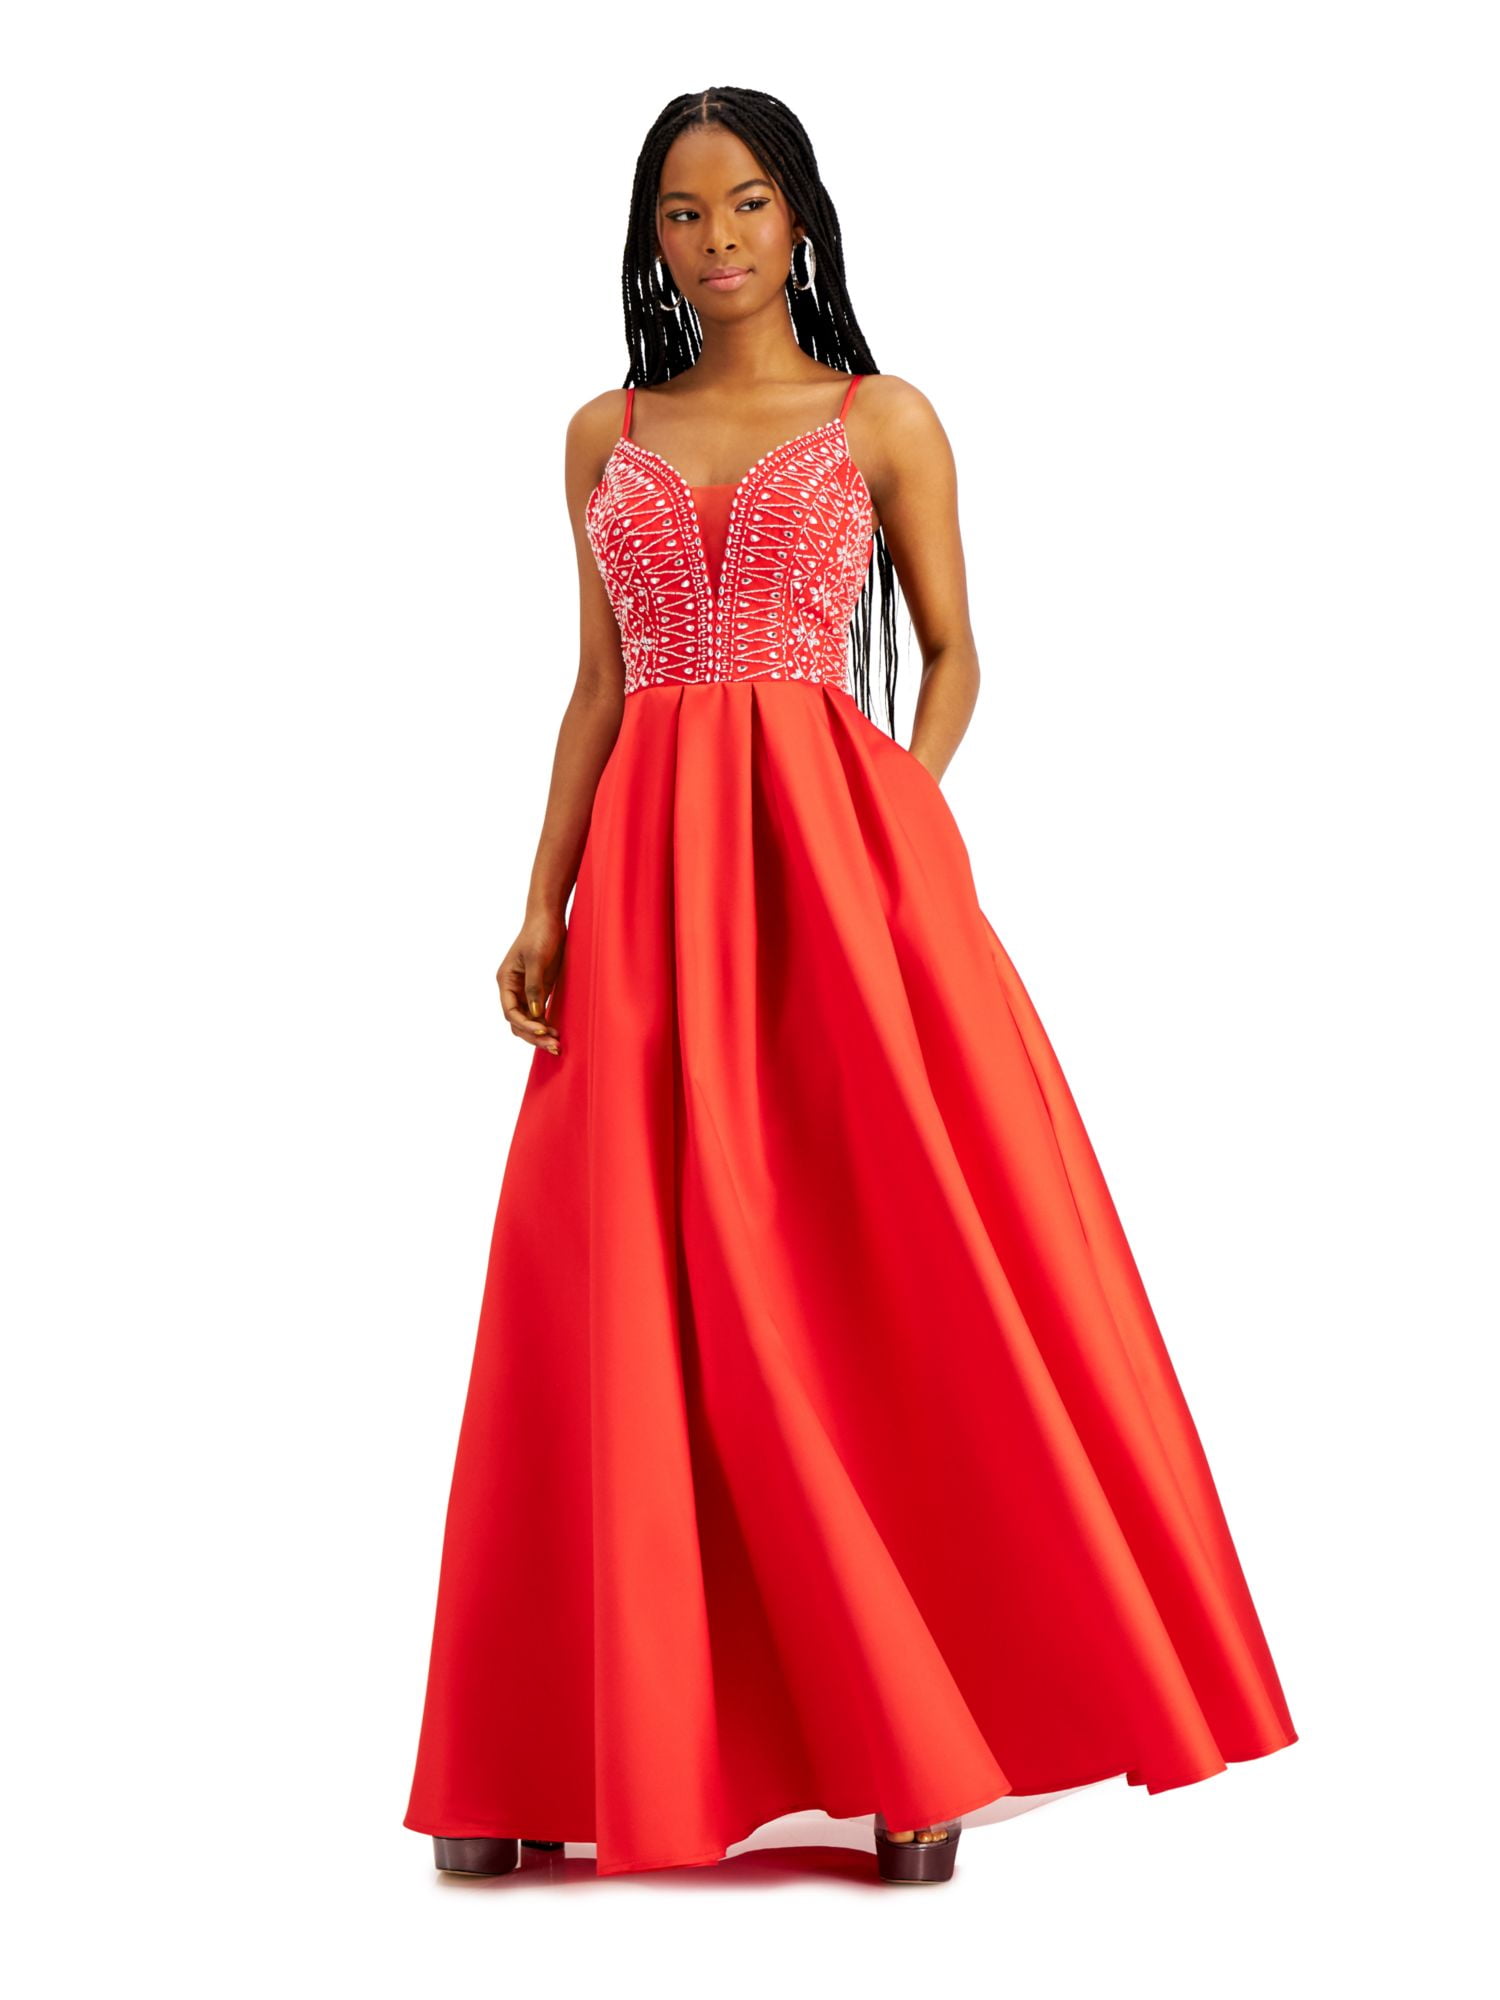 Glitter Red Pastel Green Quinceanera Dresses With Spaghetti Straps, V Neck,  Appliques, Lace, Flower Beads, And Sequin Perfect For Formal Occasions And  Ball Gowns For Girls 15+ From Zaomeng321, $338.42 | DHgate.Com